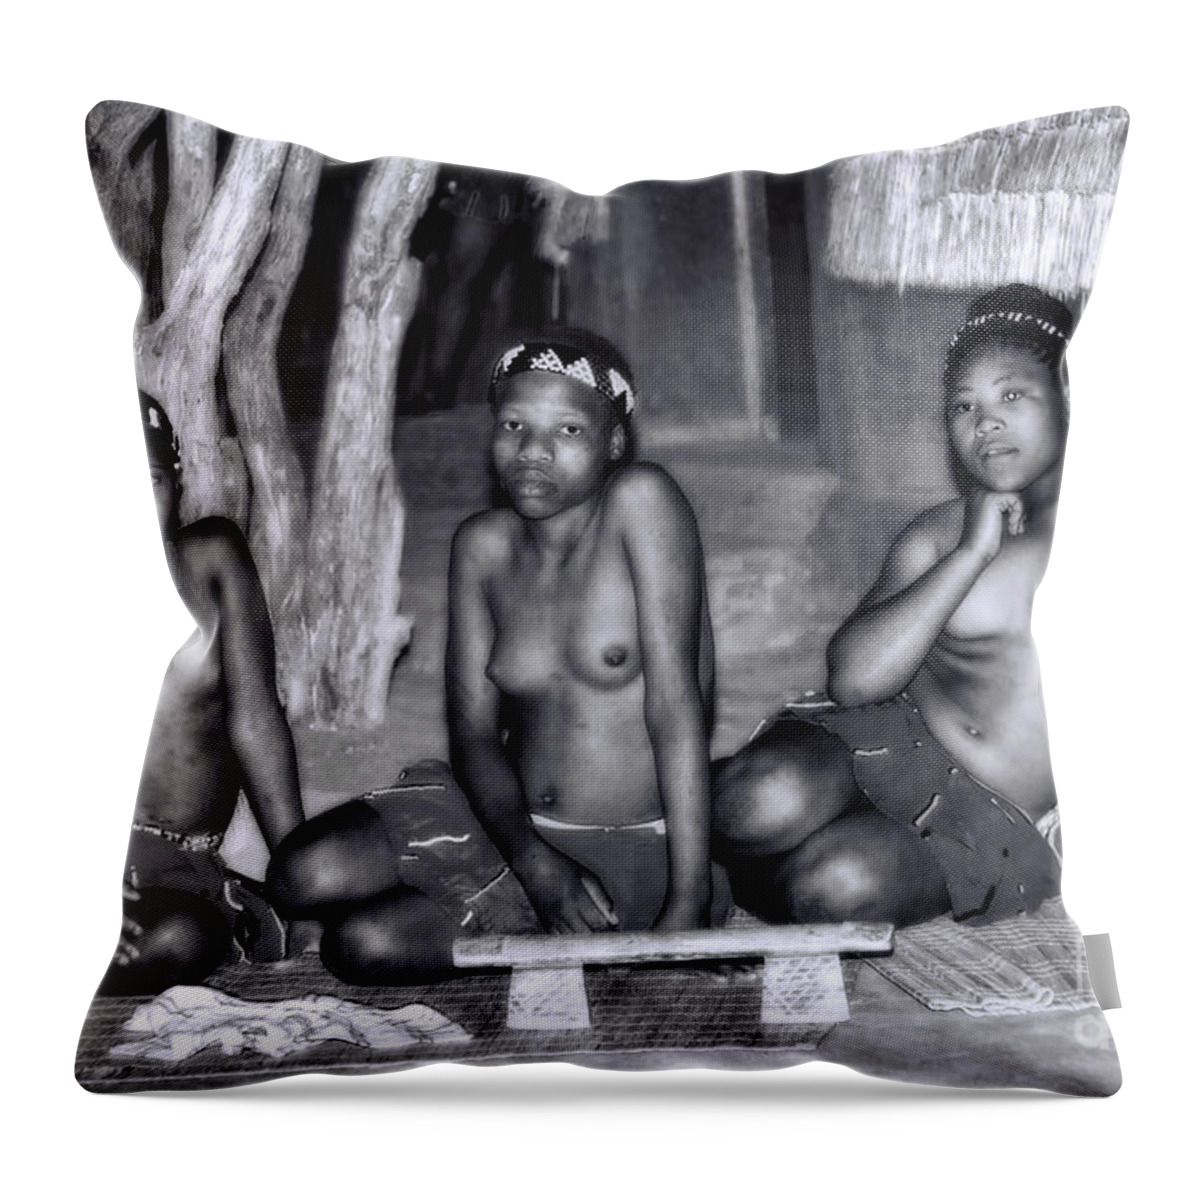 South Africa Nightly Campfires Dancing Throw Pillow featuring the photograph Zulu Women by Rick Bragan